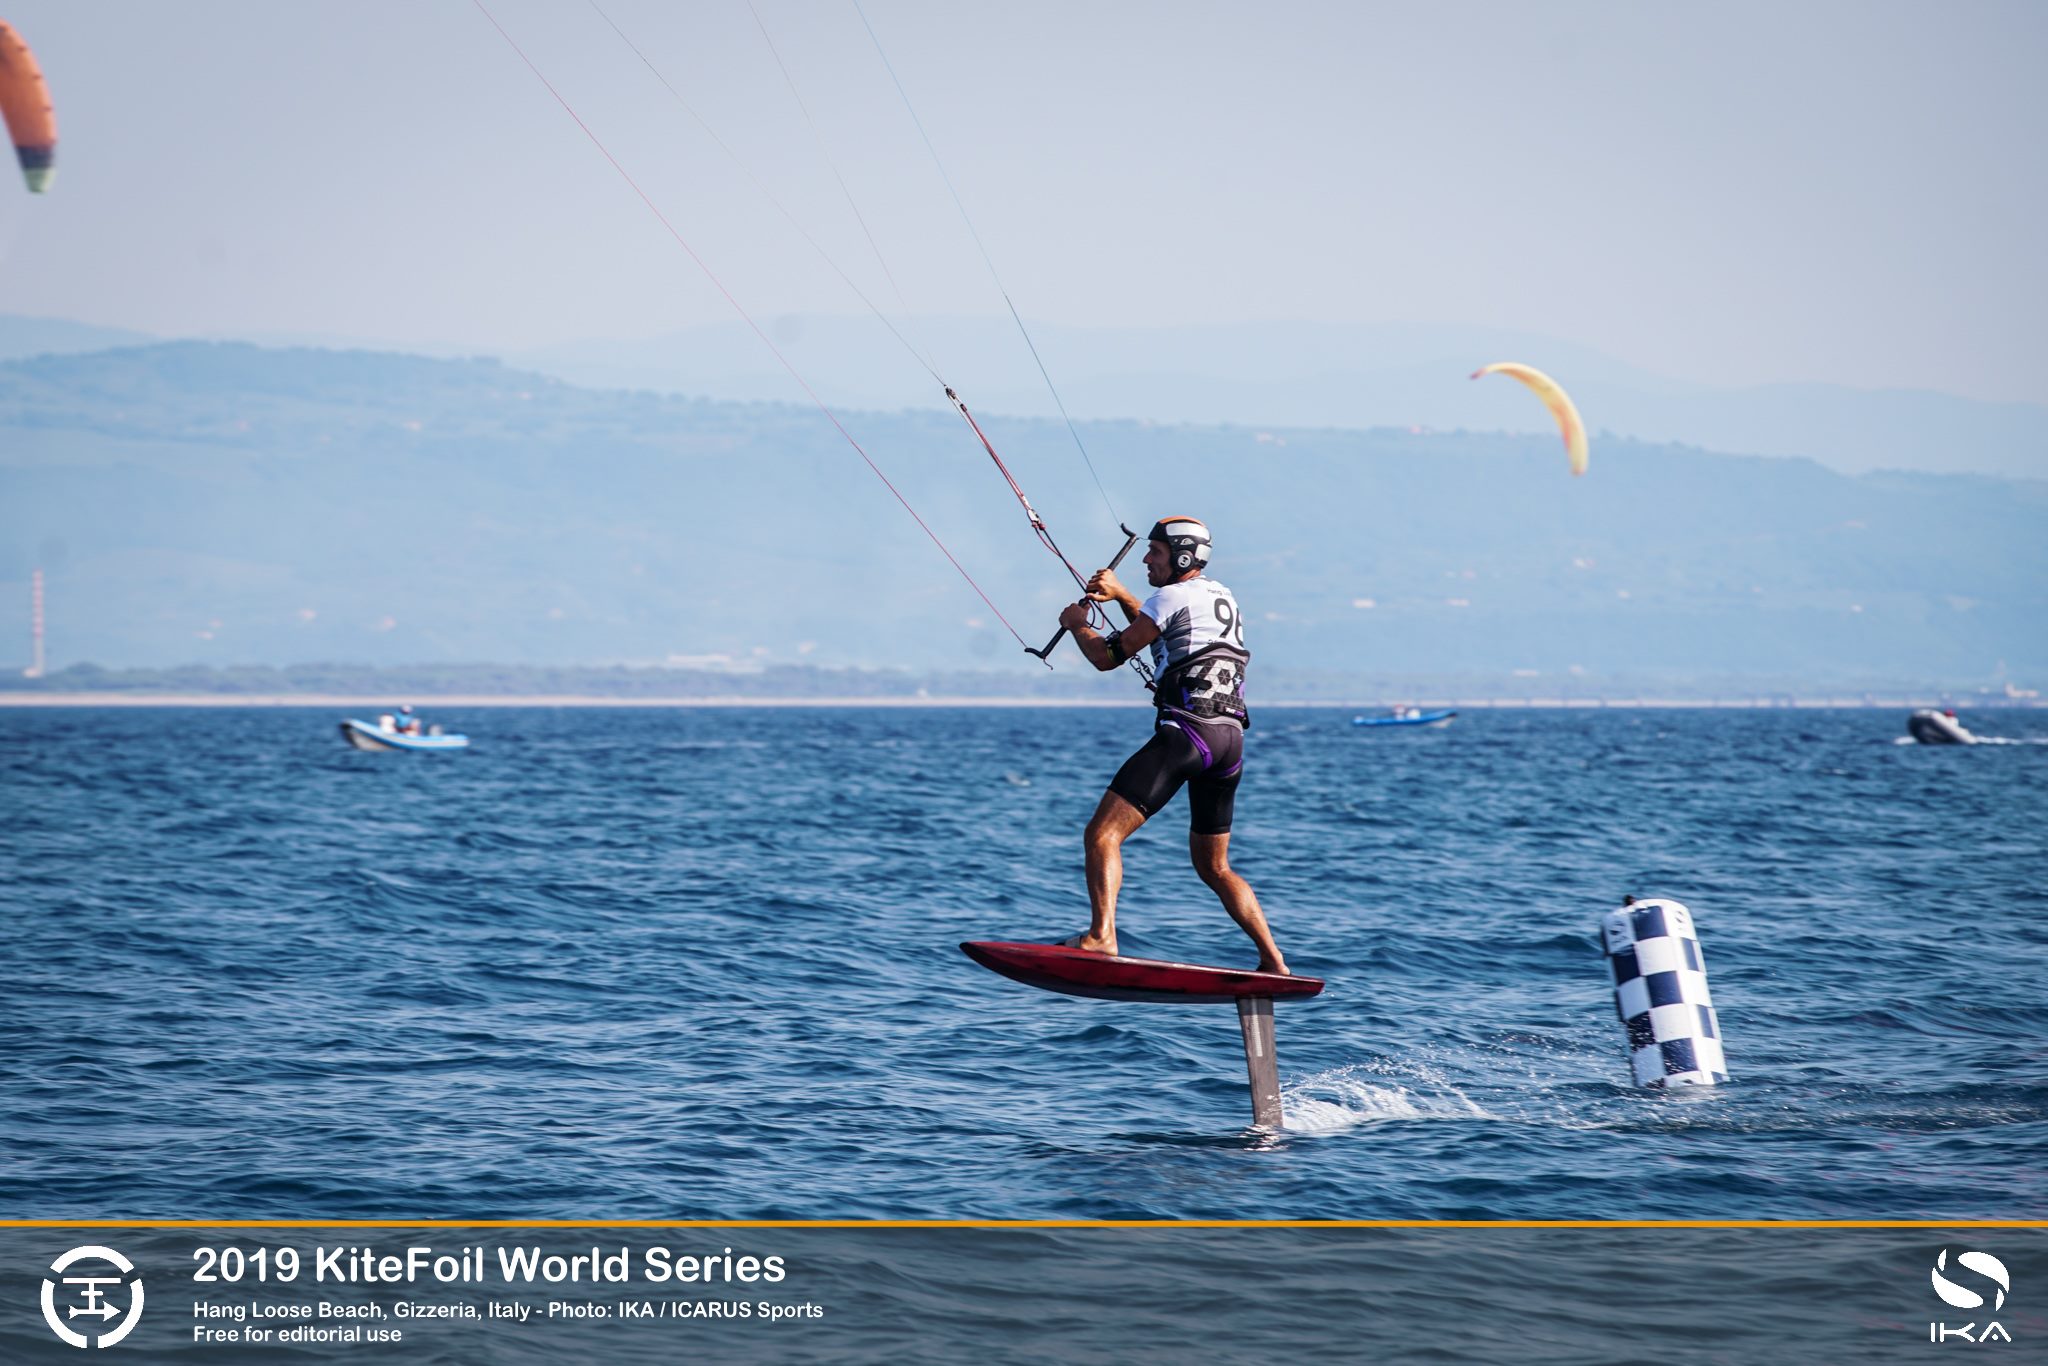  KiteFoil  GoldCup  Gizzeria ITA  Final results